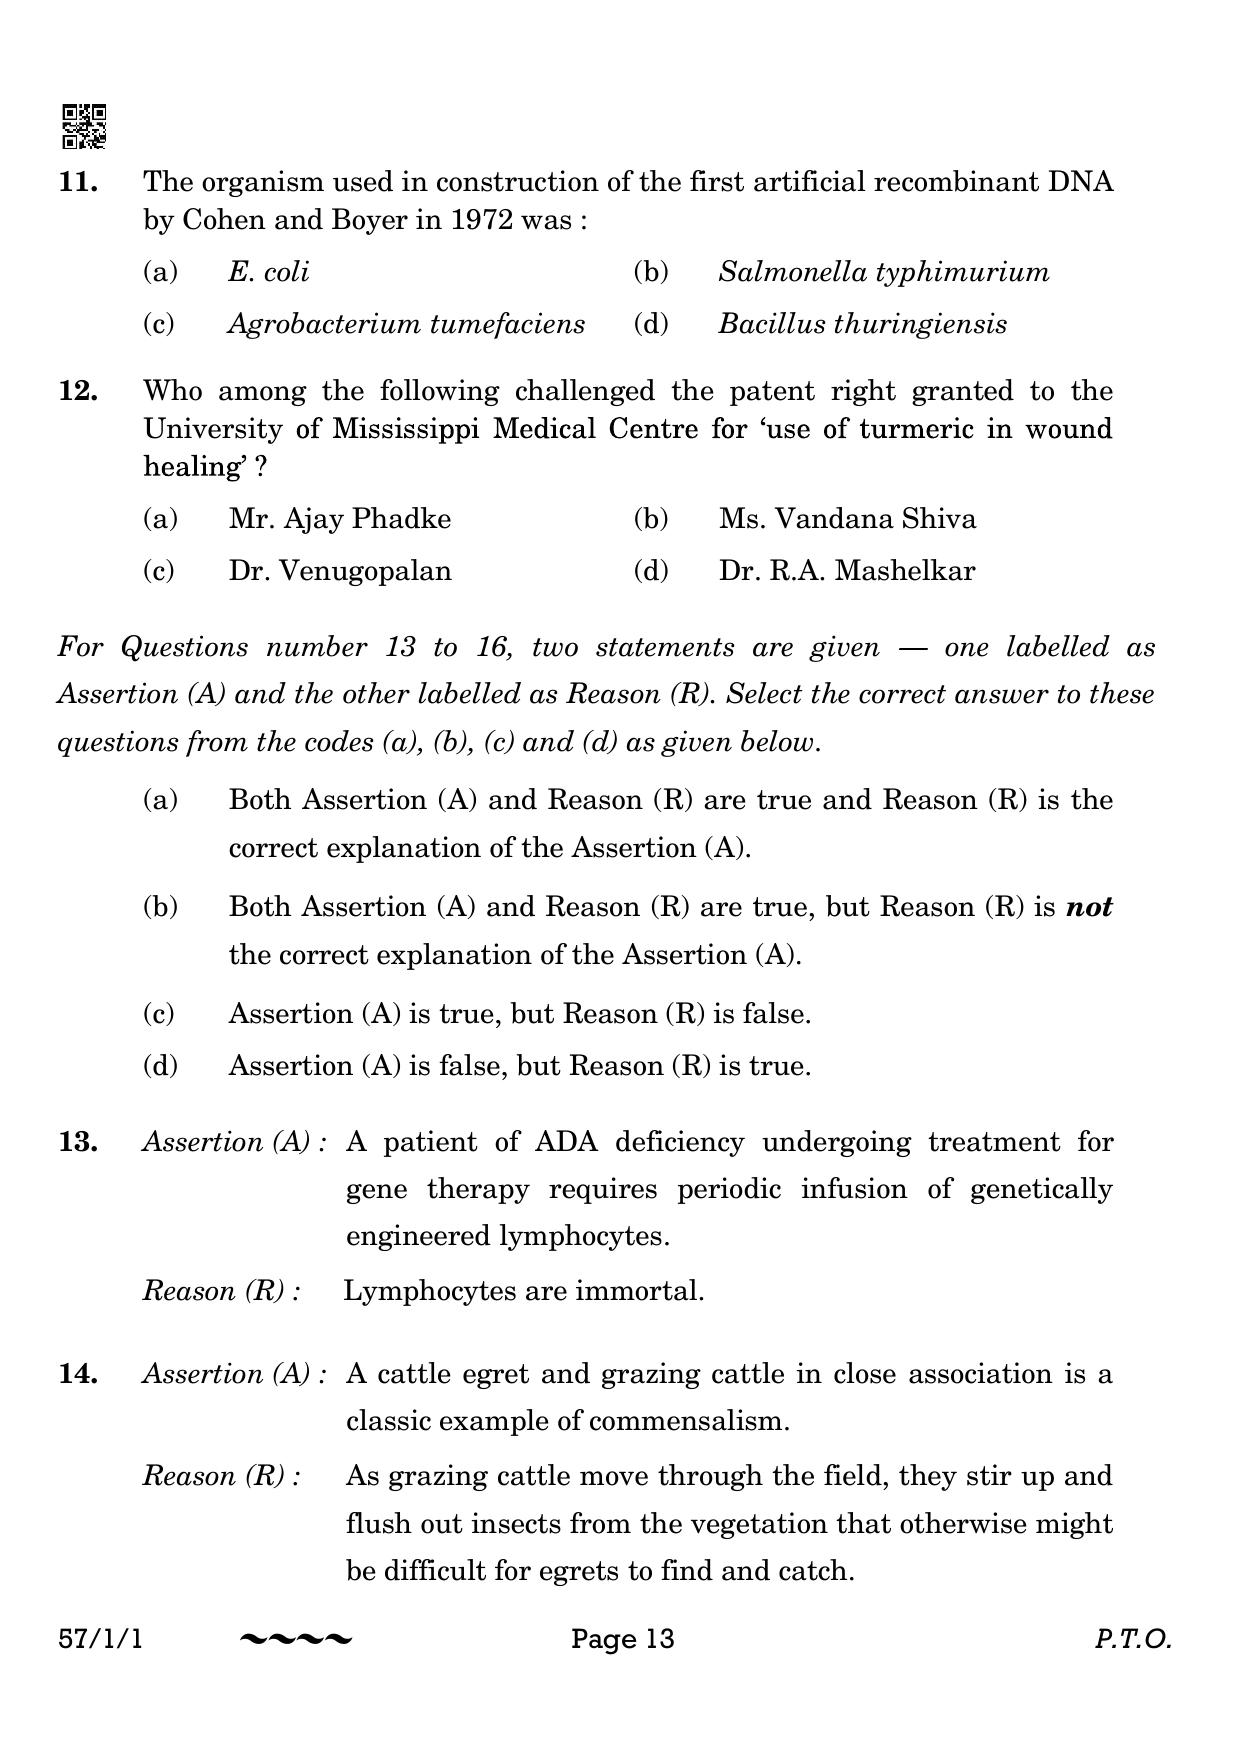 CBSE Class 12 57-1-1 Biology 2023 Question Paper - Page 13